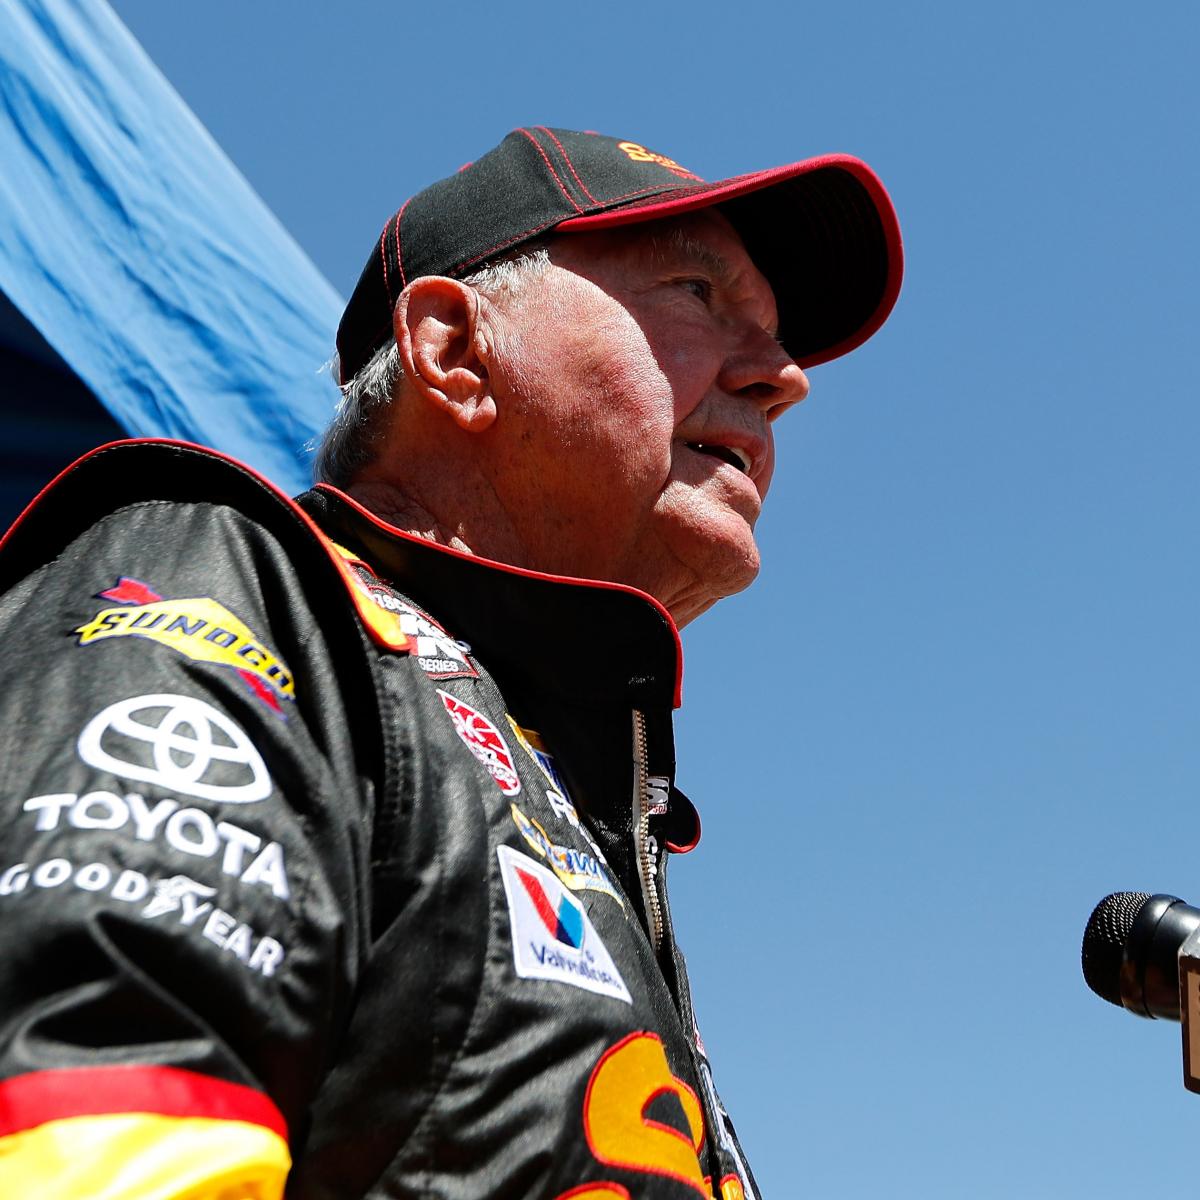 This NASCAR Legend Celebrated His 90th Birthday by Breaking Records